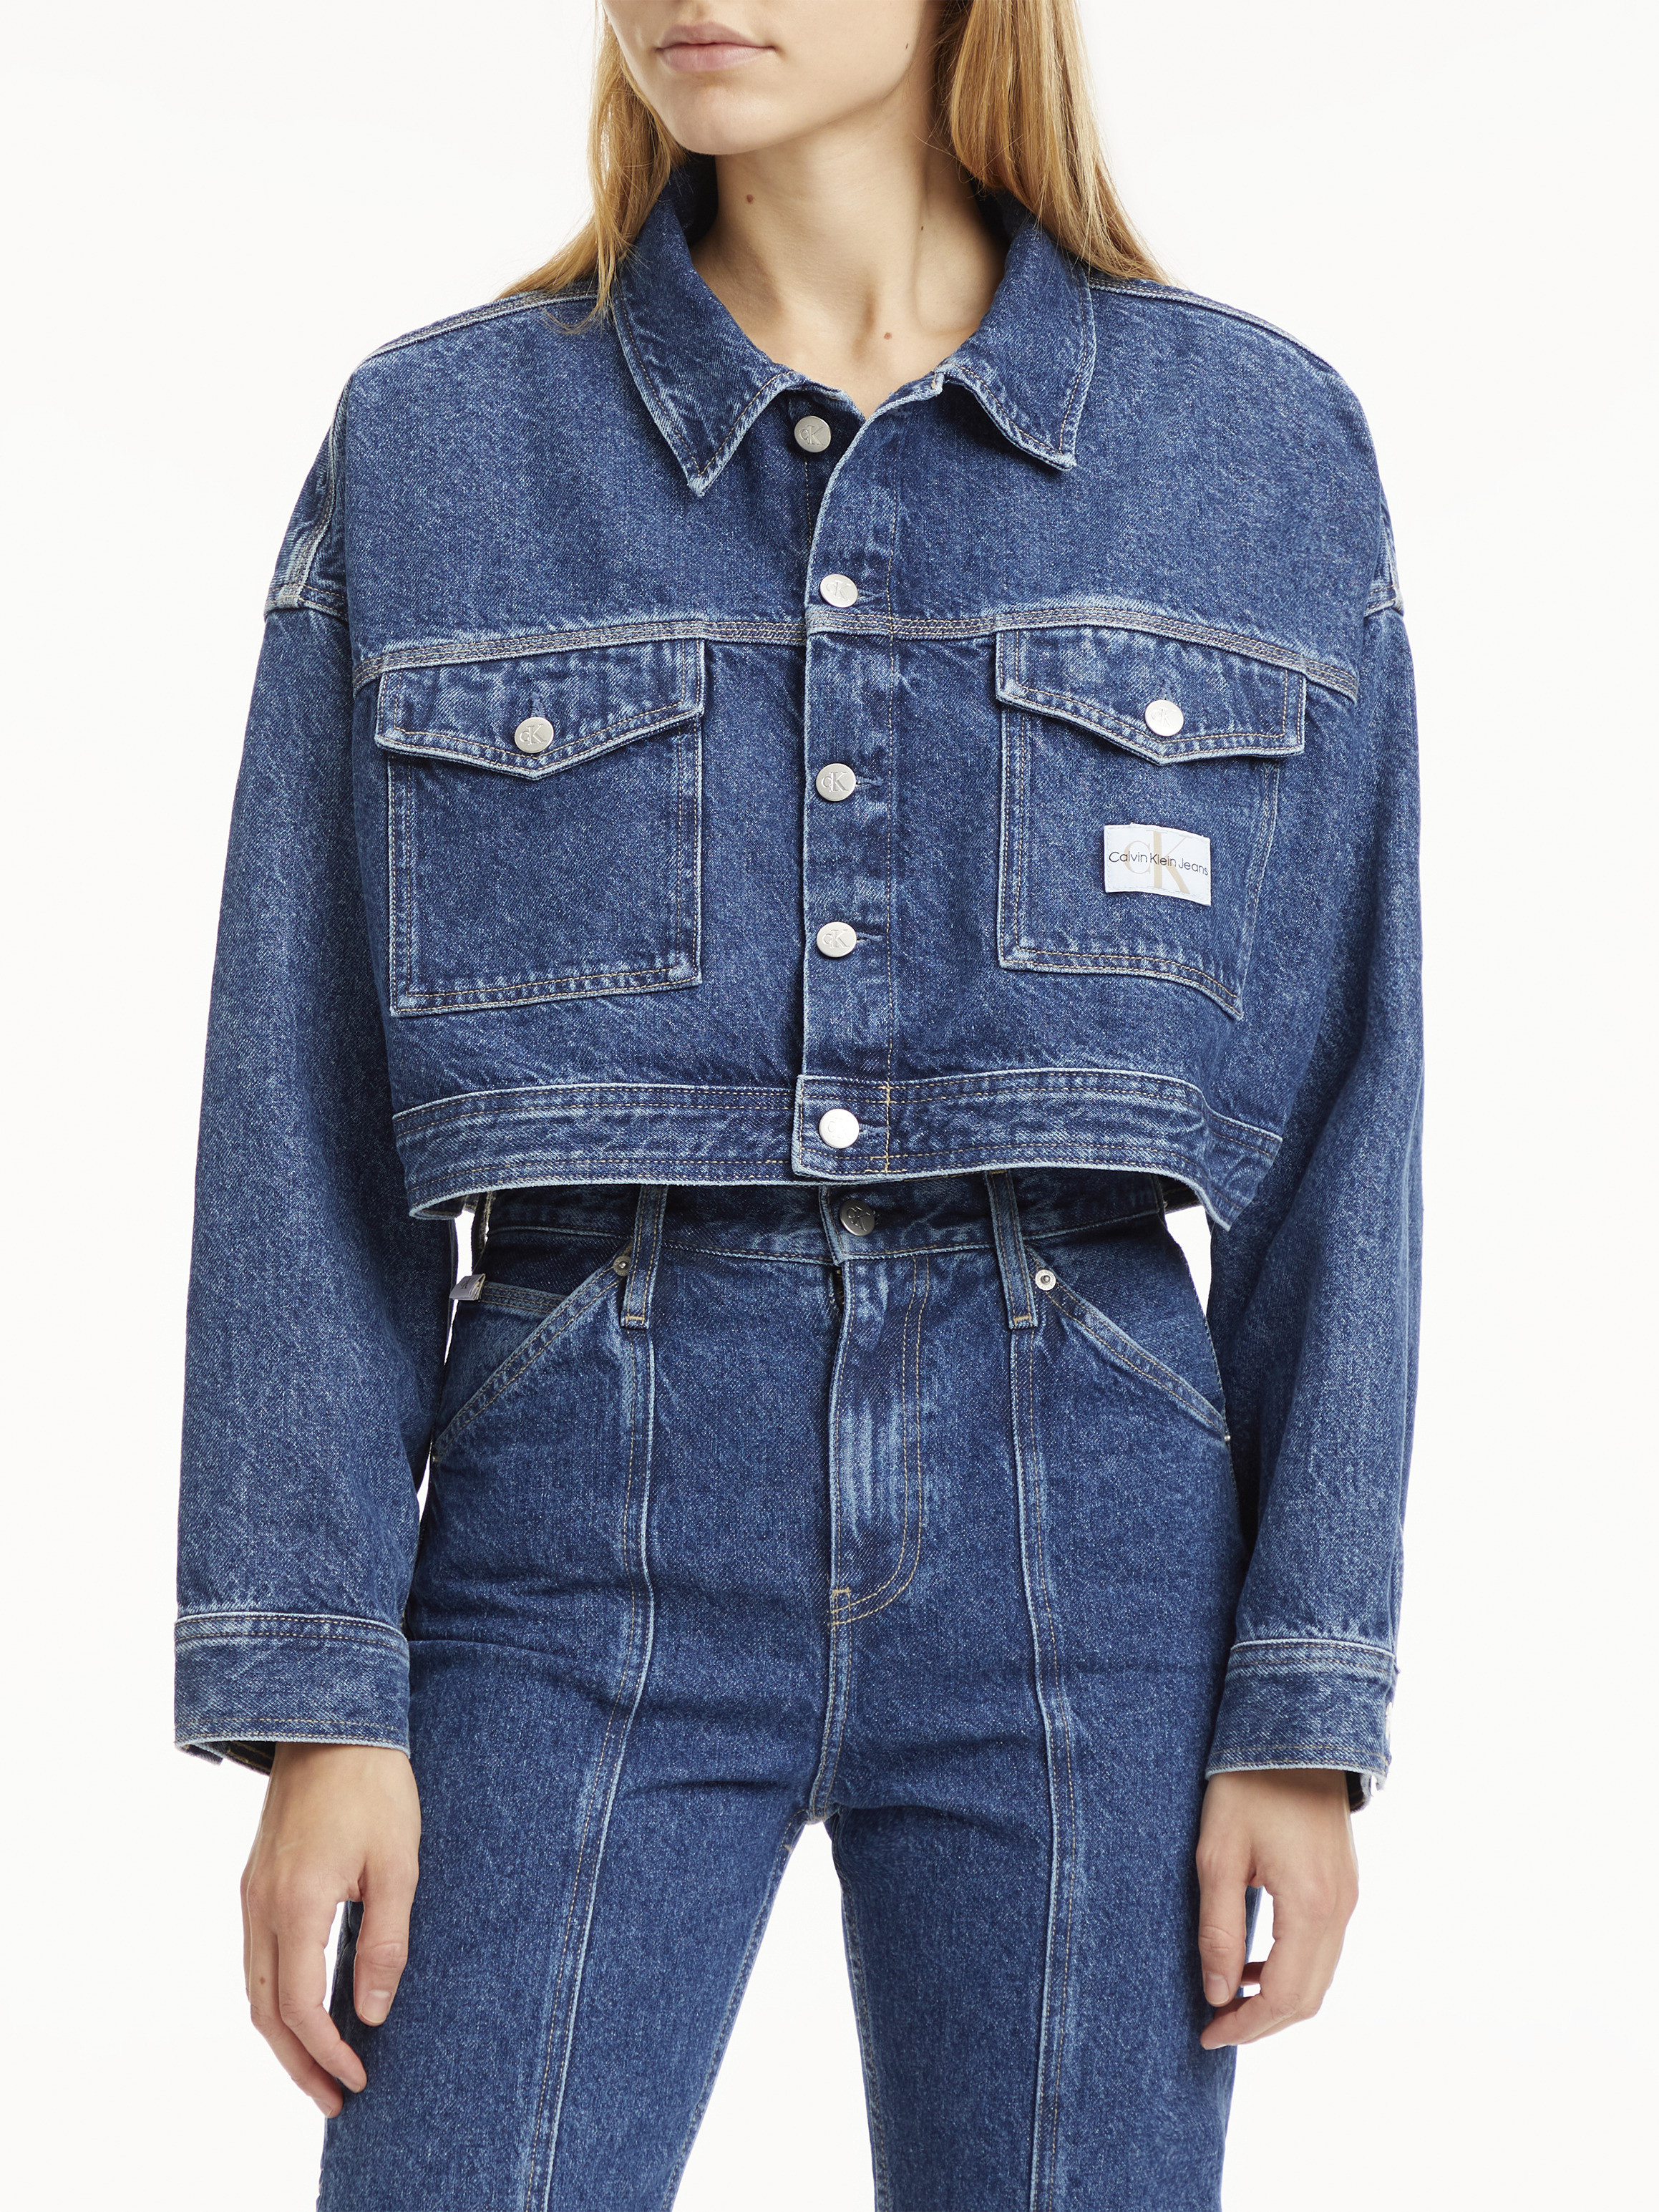 Calvin Klein Jeans - Giacca relaxed fit corta in denim, Denim, large image number 3